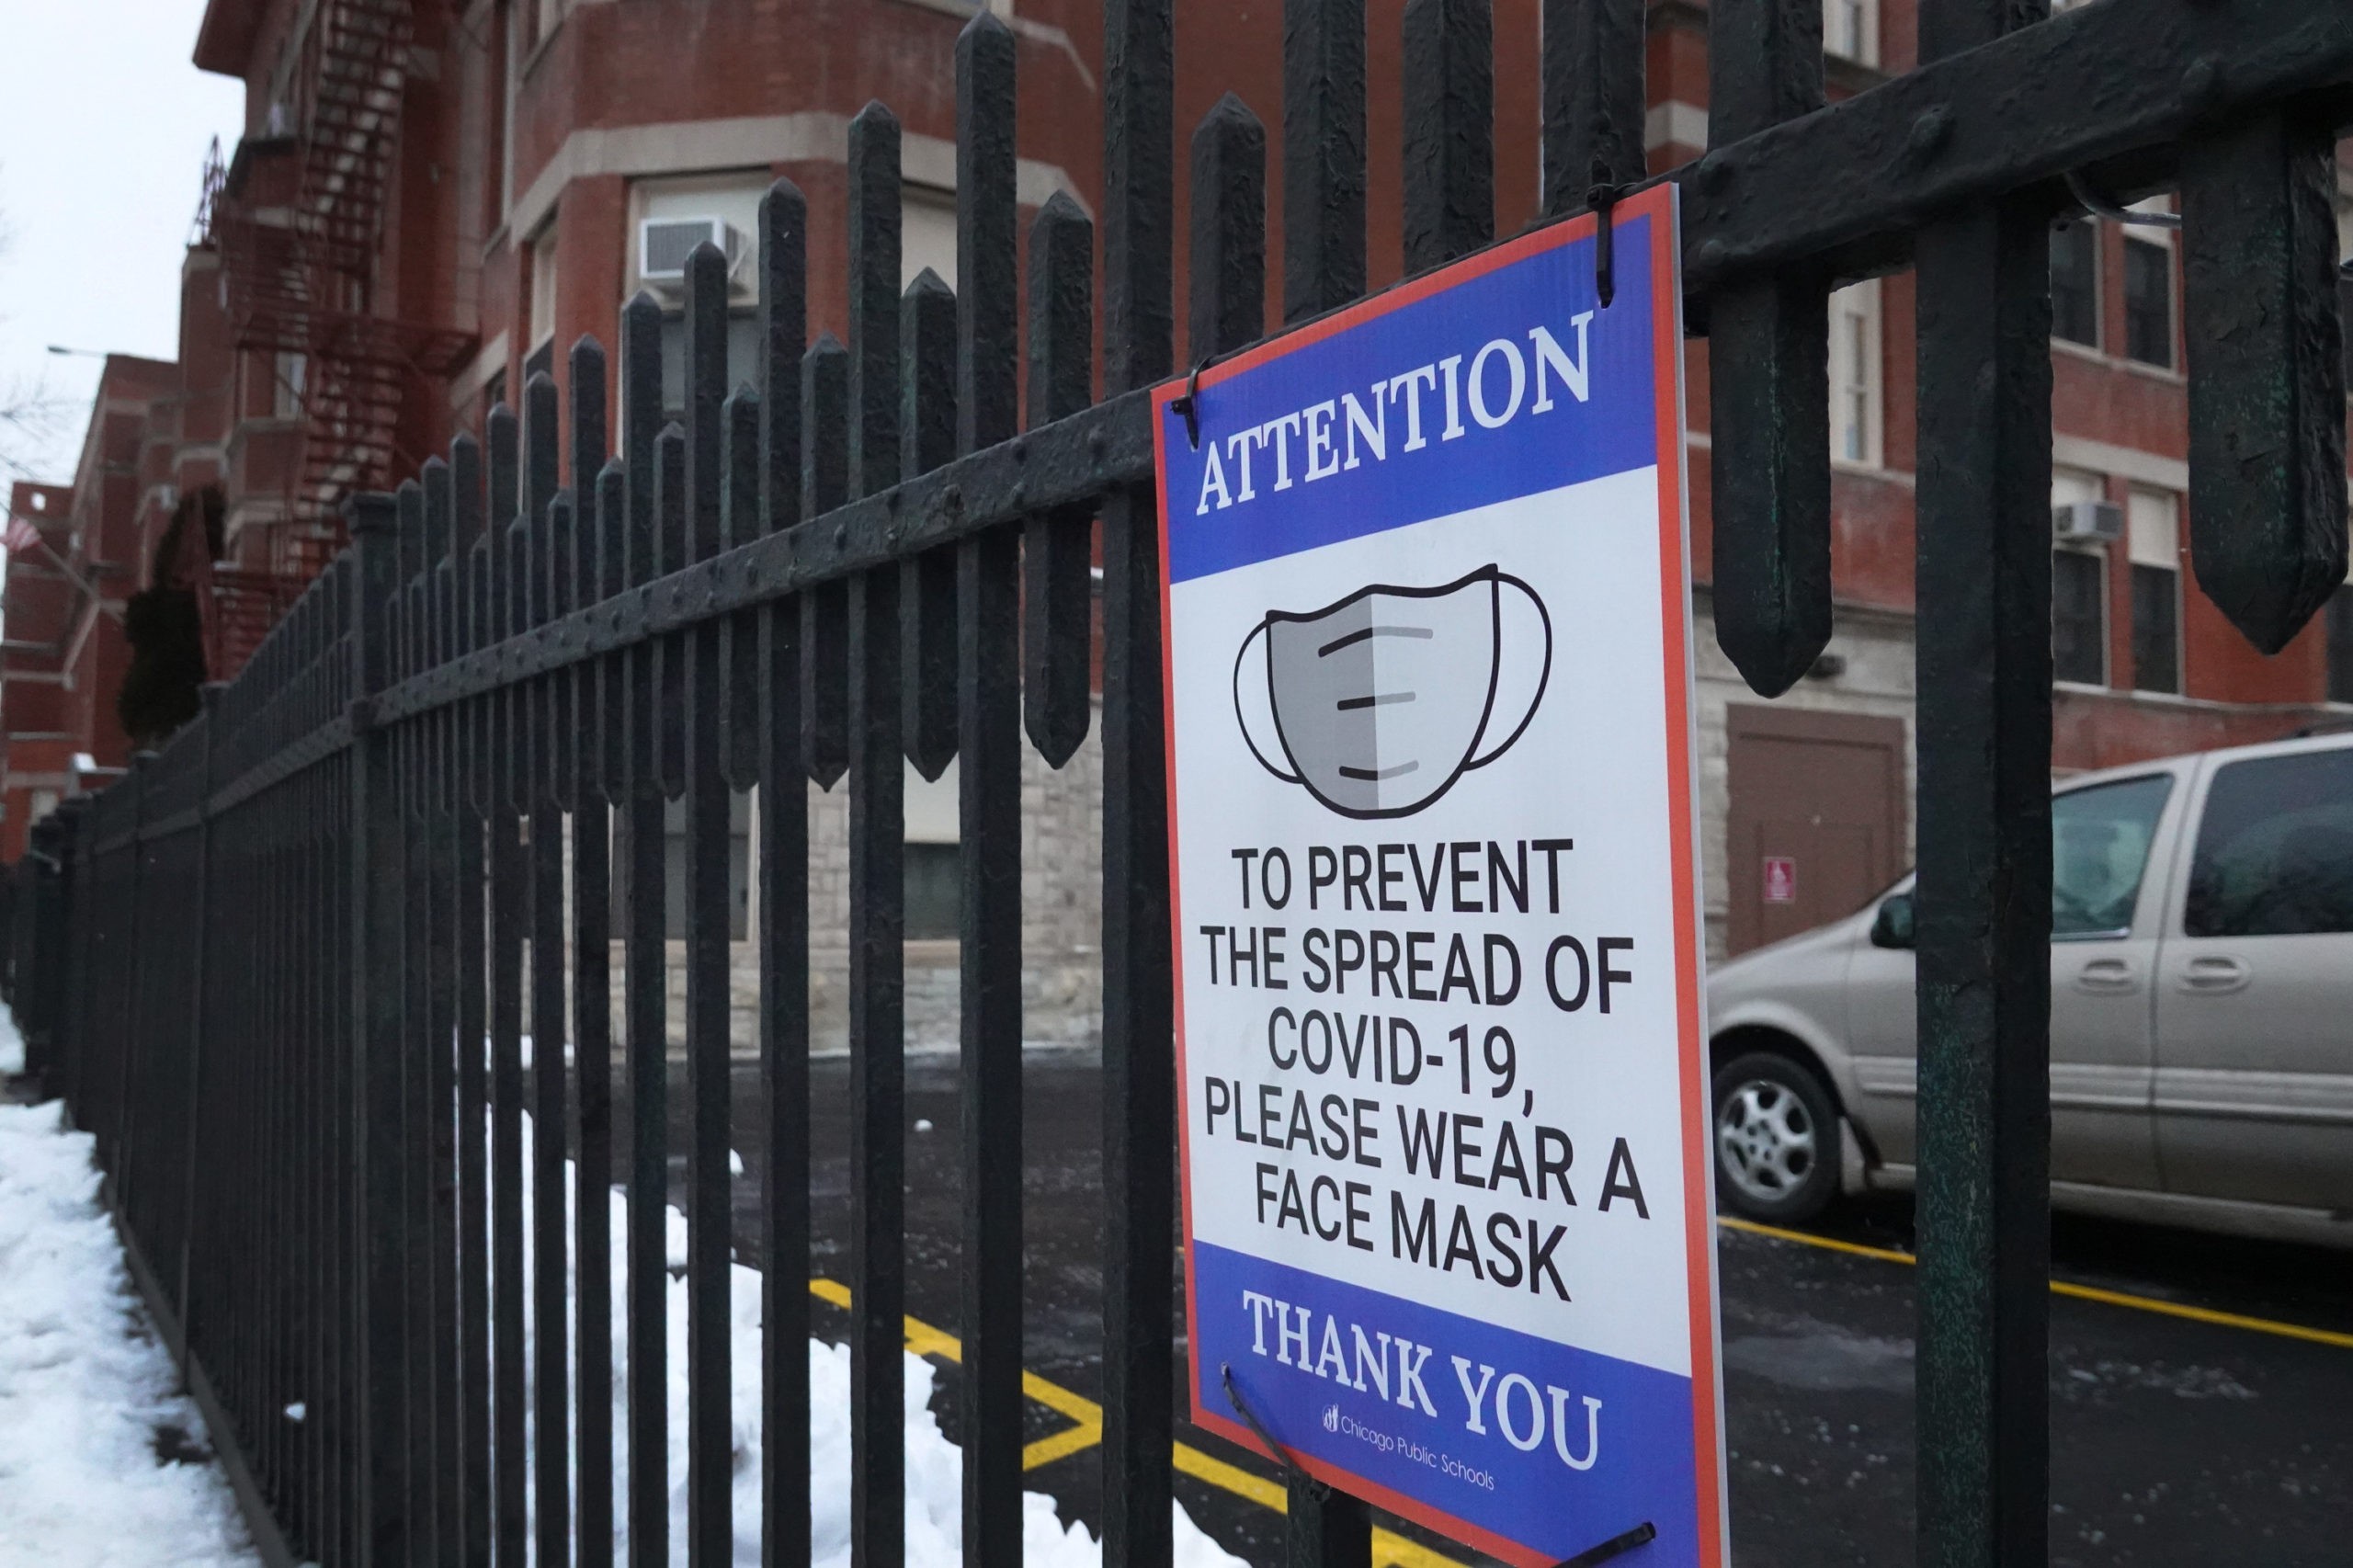 A sign on the fence outside of Lowell elementary school asks students, staff and visitors to wear a mask to prevent the spread of COVID-19 on January 05, 2022 in Chicago, Illinois. Classes at all of Chicago public schools have been canceled today by the school district after the teacher's union voted to return to virtual learning, citing unsafe conditions in the schools as the Omicron variant of the coronavirus continues to spread. (Photo by Scott Olson/Getty Images)